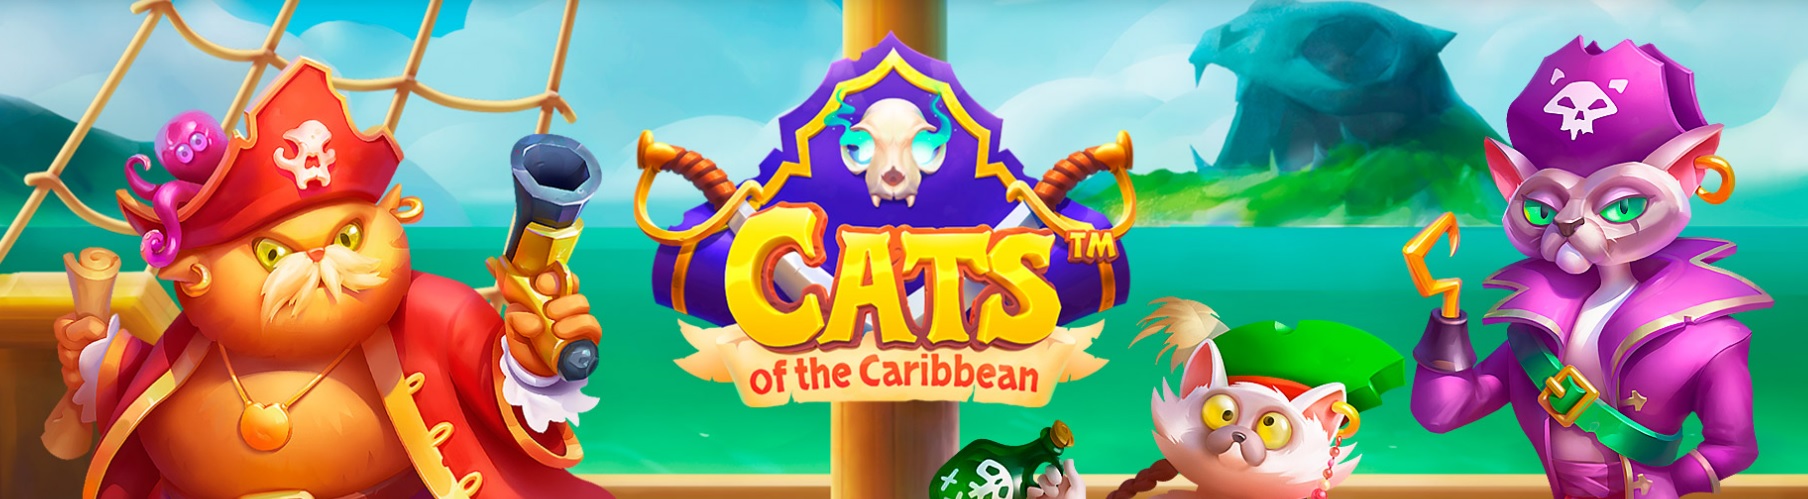 cats of the caribbean slot featured logo